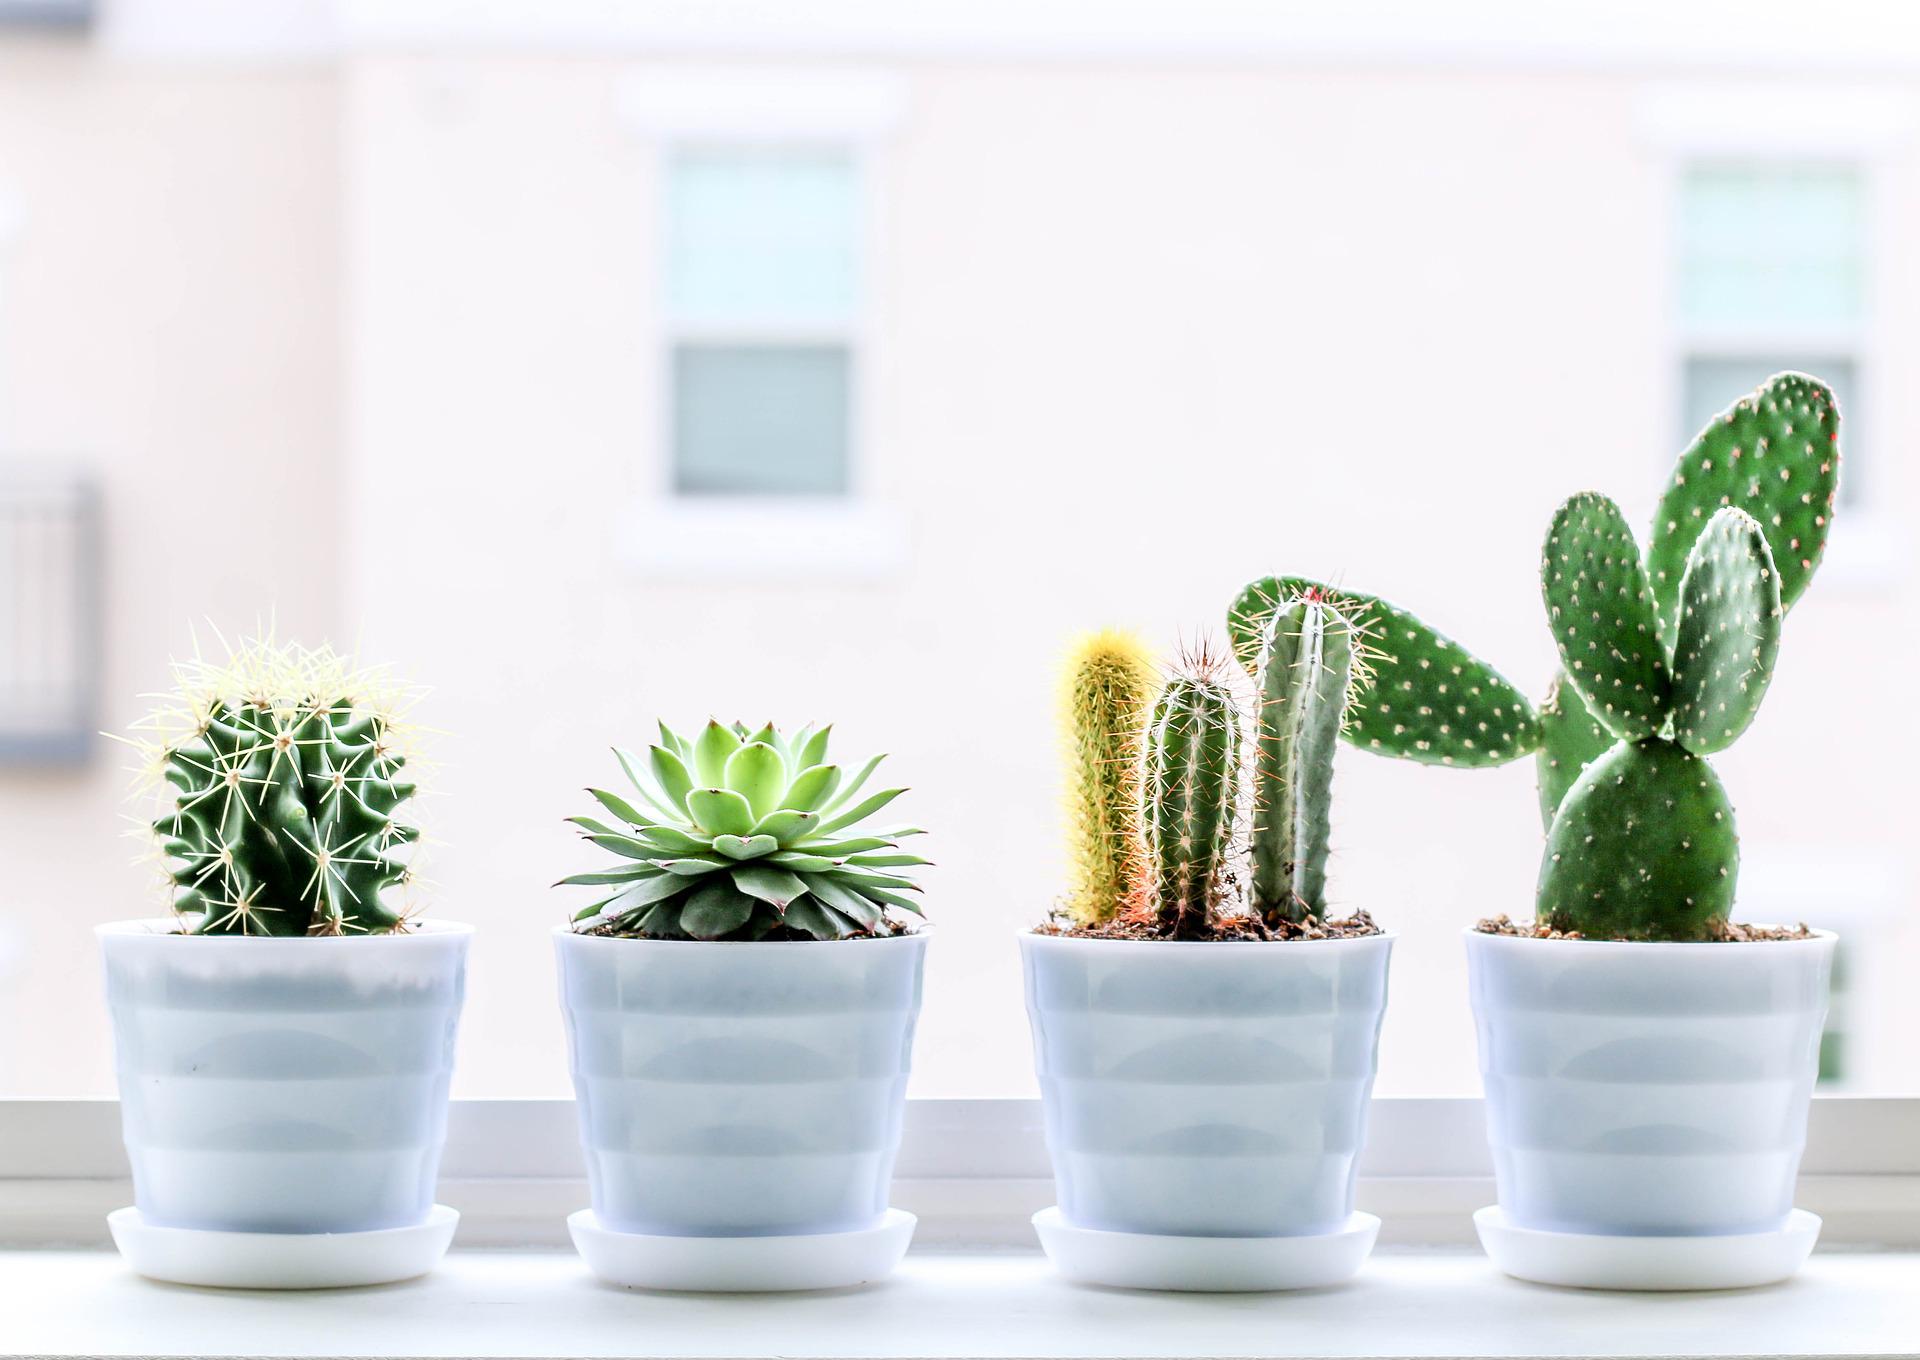 A row of four cacti plants in shiny, white ceramic pots. They sit on a white windowsill, with a blurry cream coloured building showing out the window.